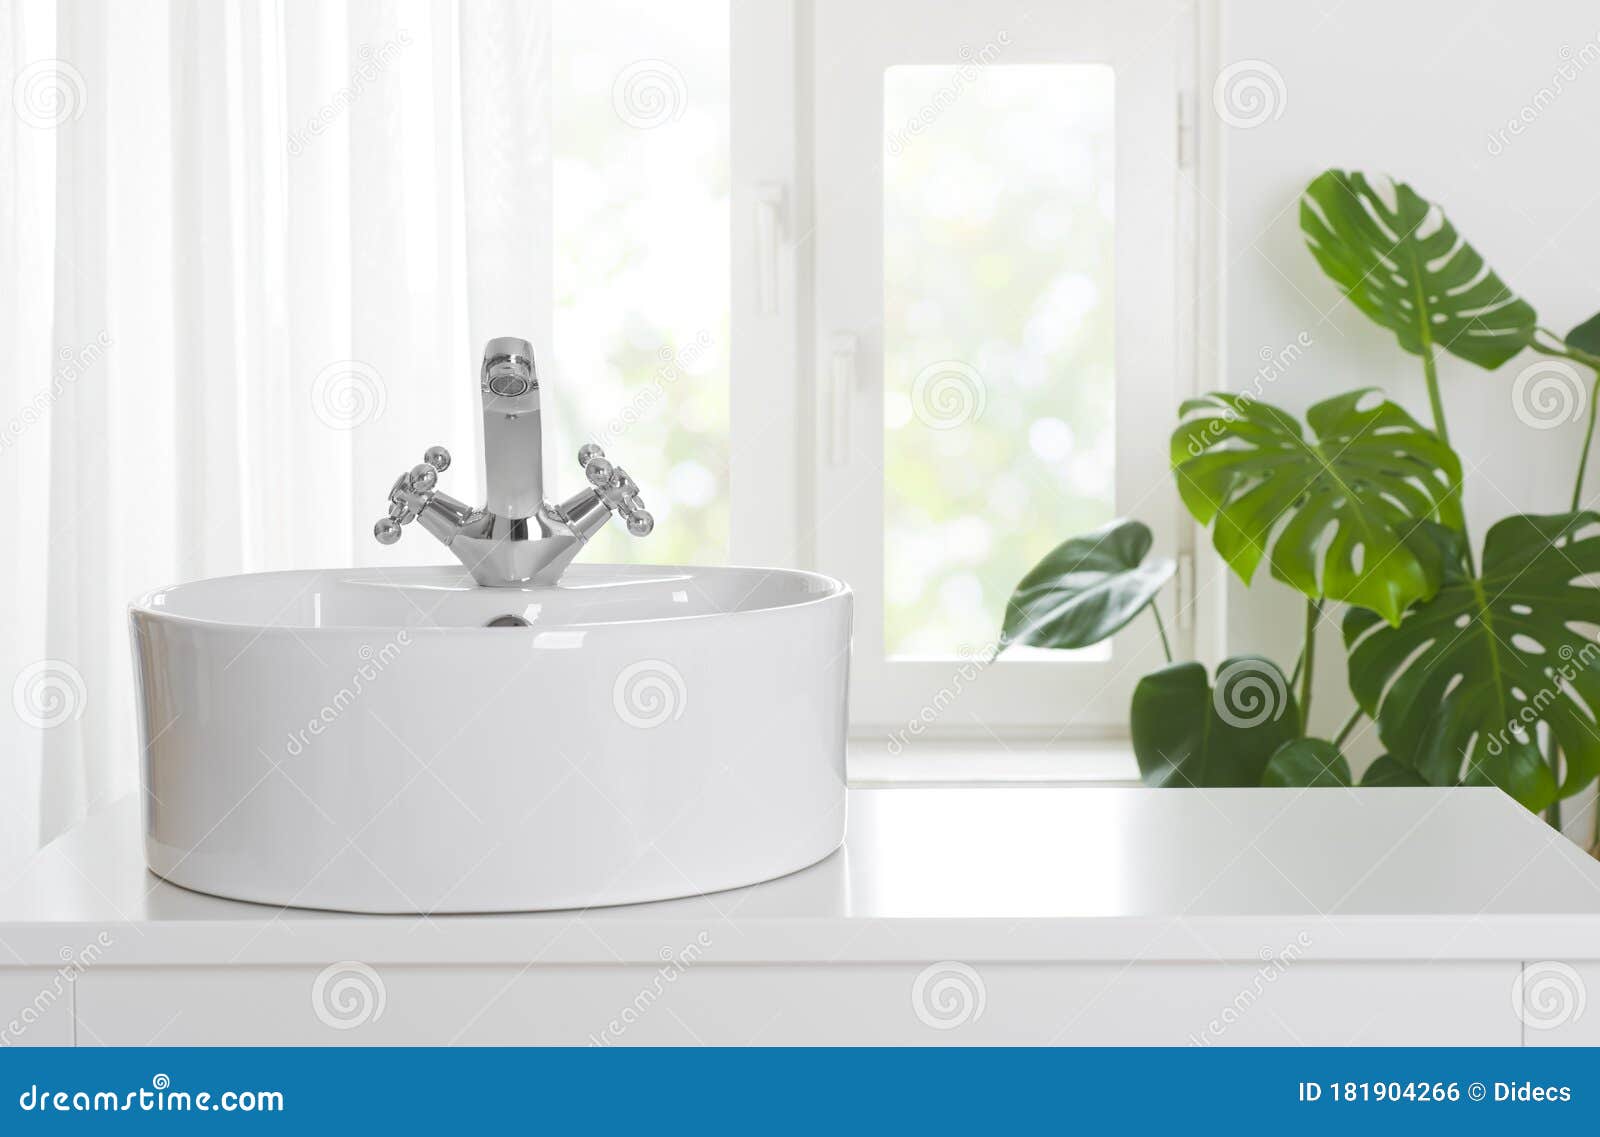 hygienic wash basin with chrome faucet on bathroom window background